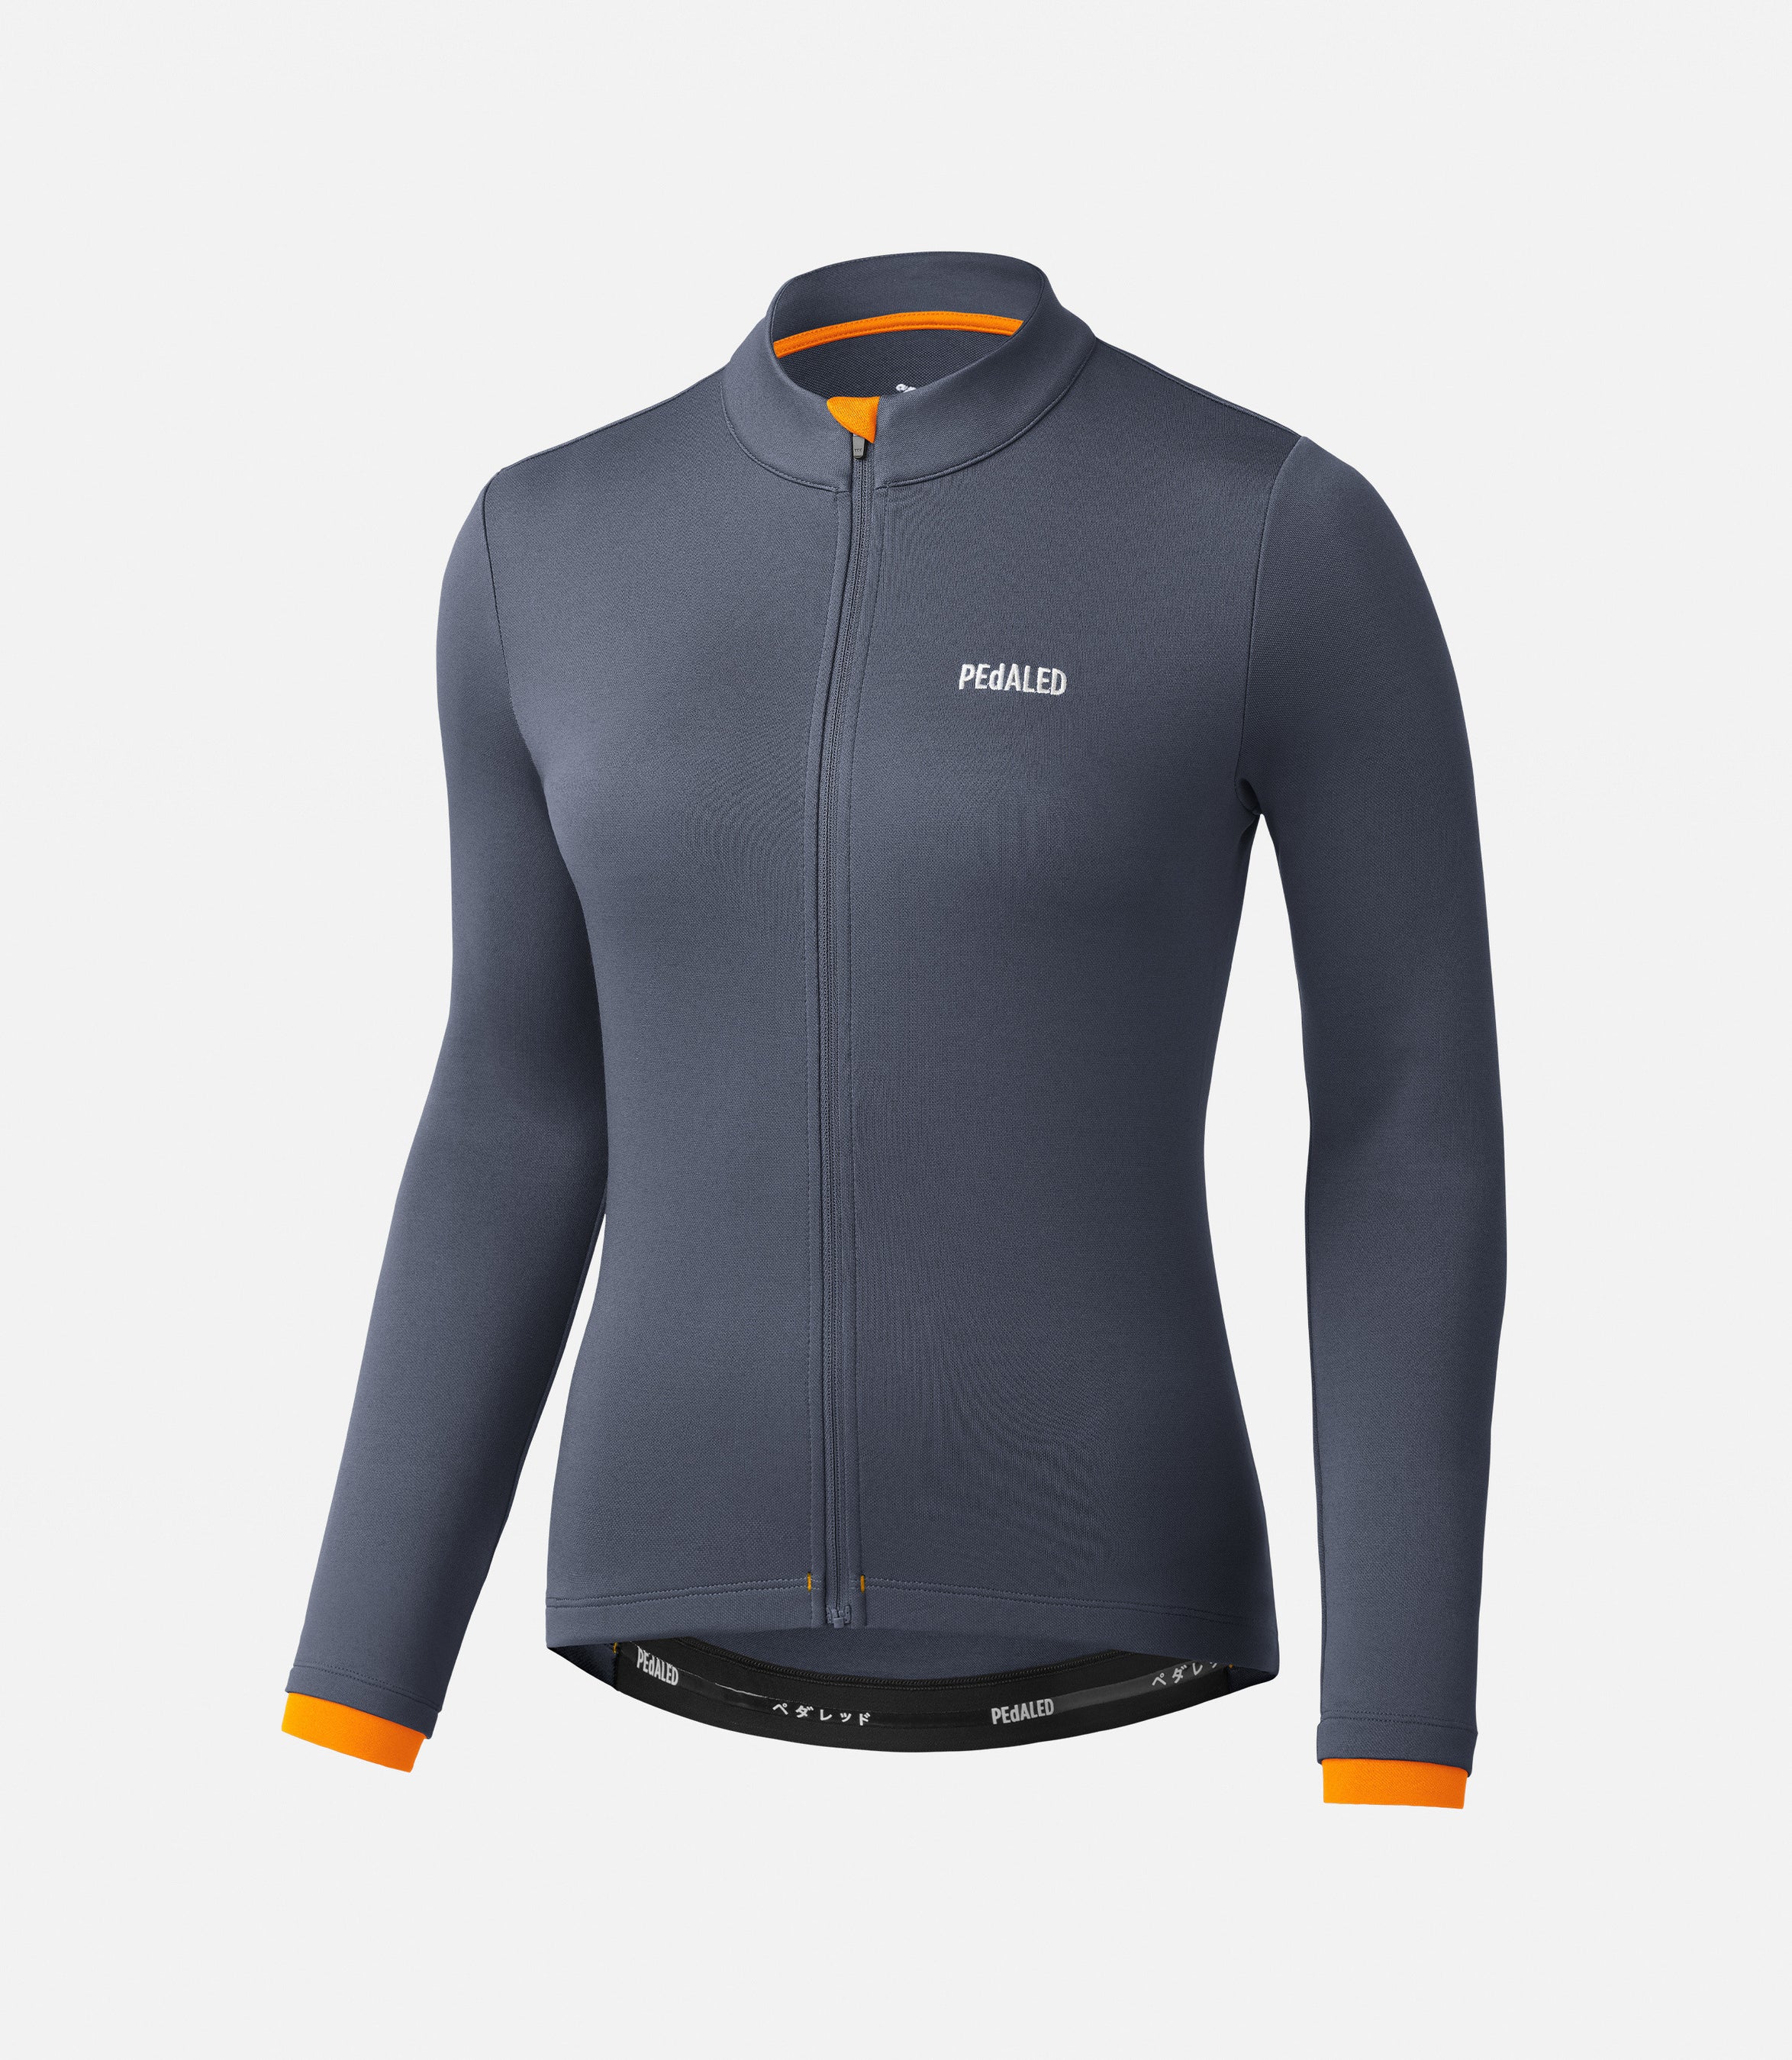 W3WMJEM0CPE_1_women cycling merino long sleeve jersey blue essential front pedaled